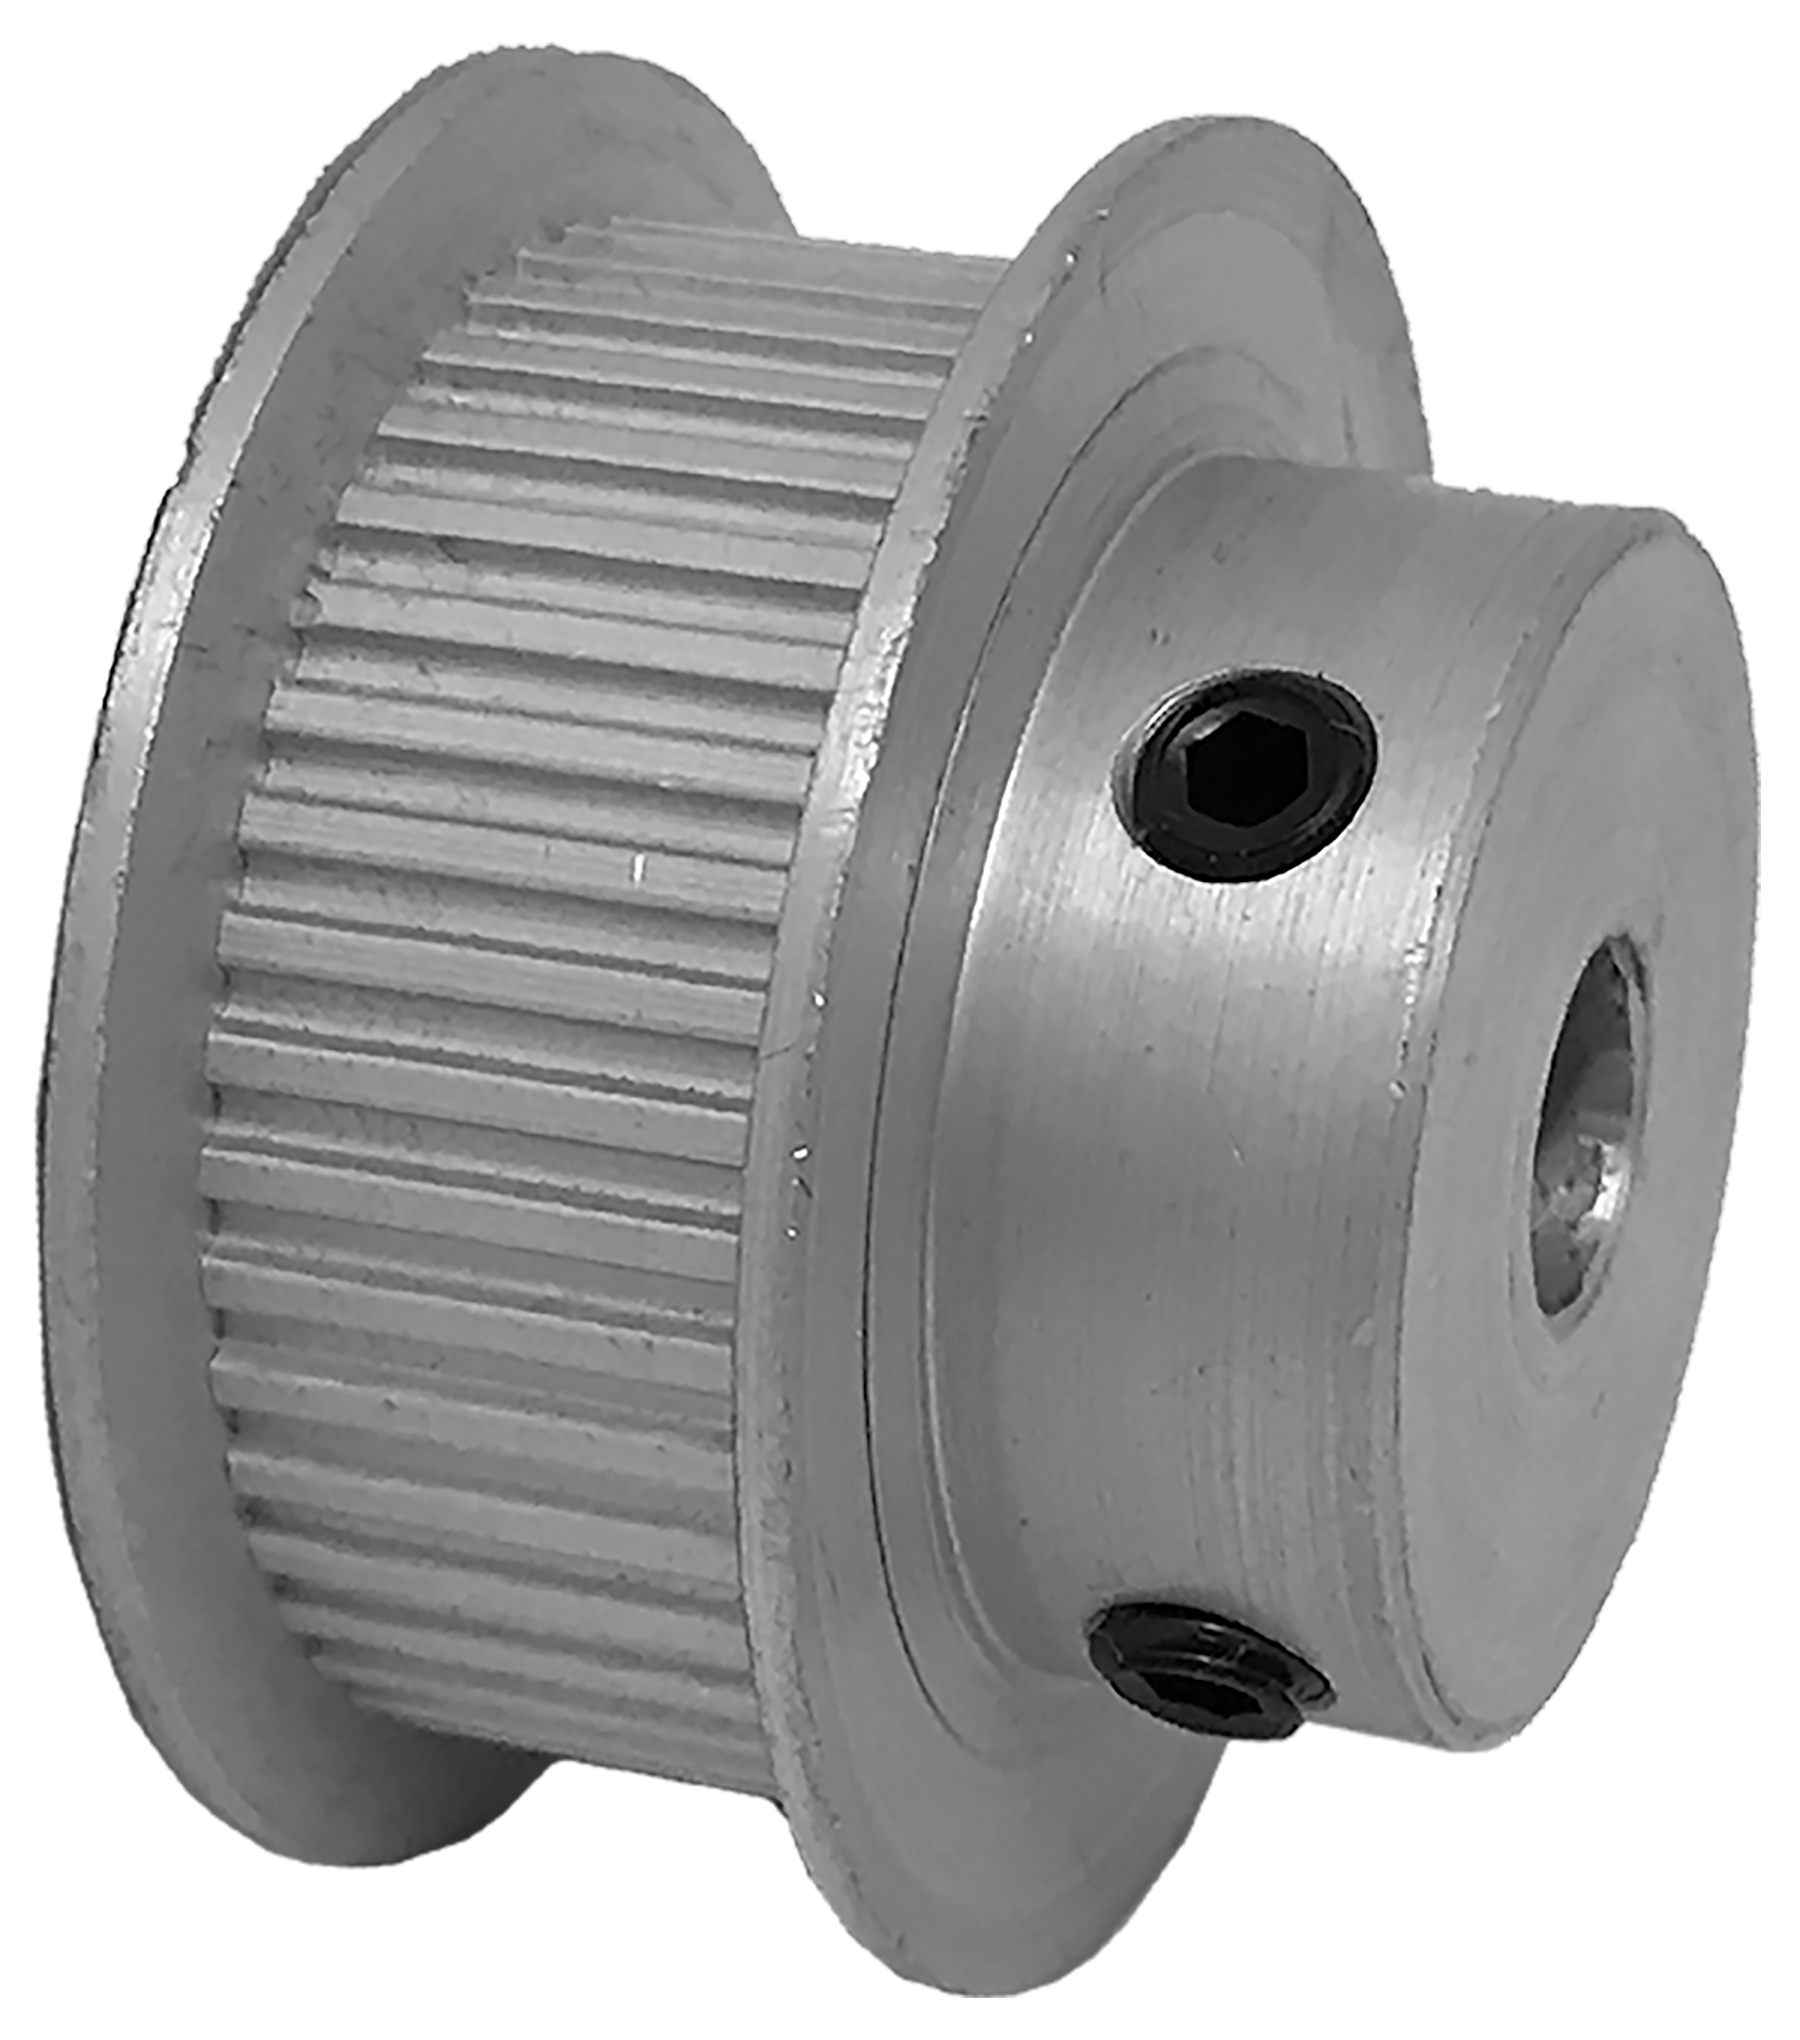 44MP037-6FA3 - Aluminum Imperial Pitch Pulleys